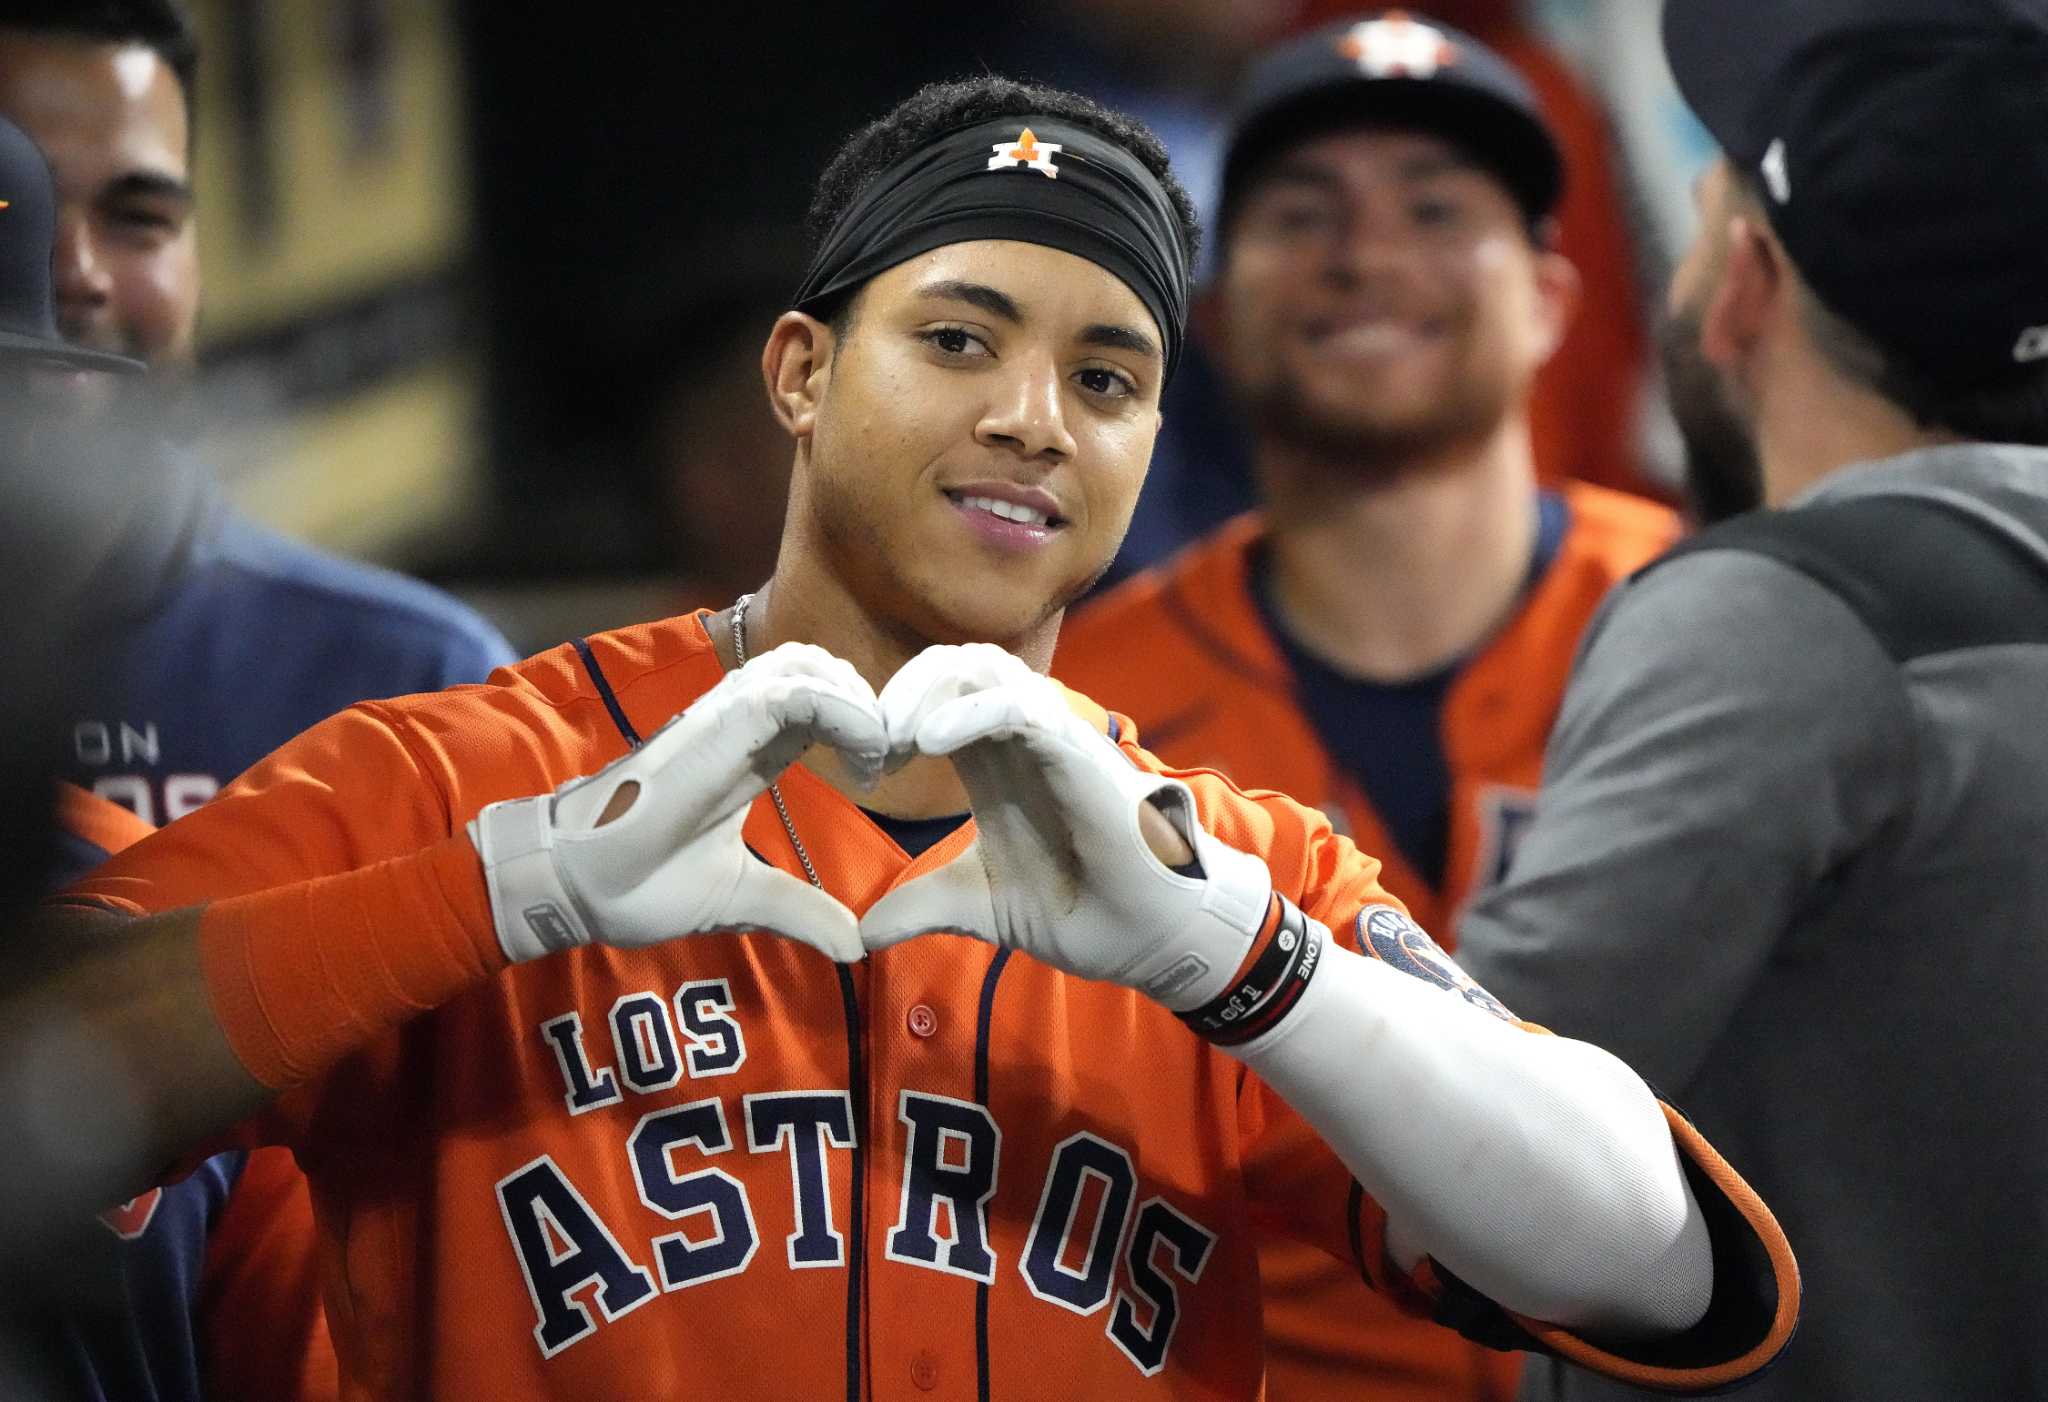 Why Astros' Jeremy Peña makes heart sign after big plays